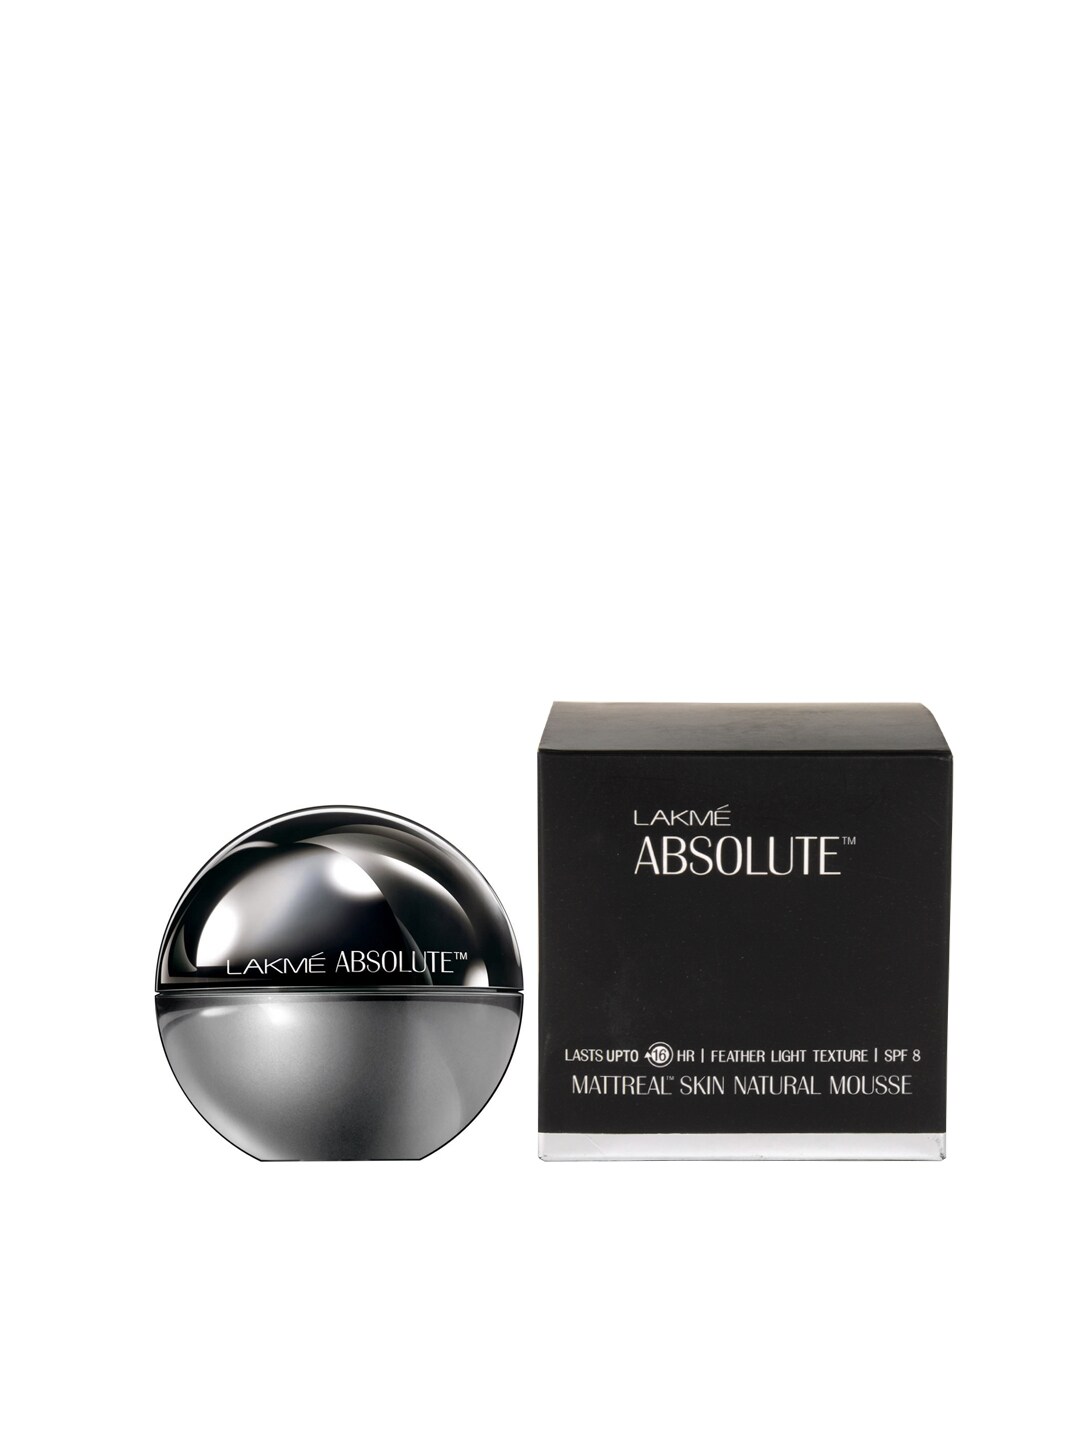 Lakme Absolute Mattreal Skin Natural Mousse with SPF 8 - Golden Light Price in India